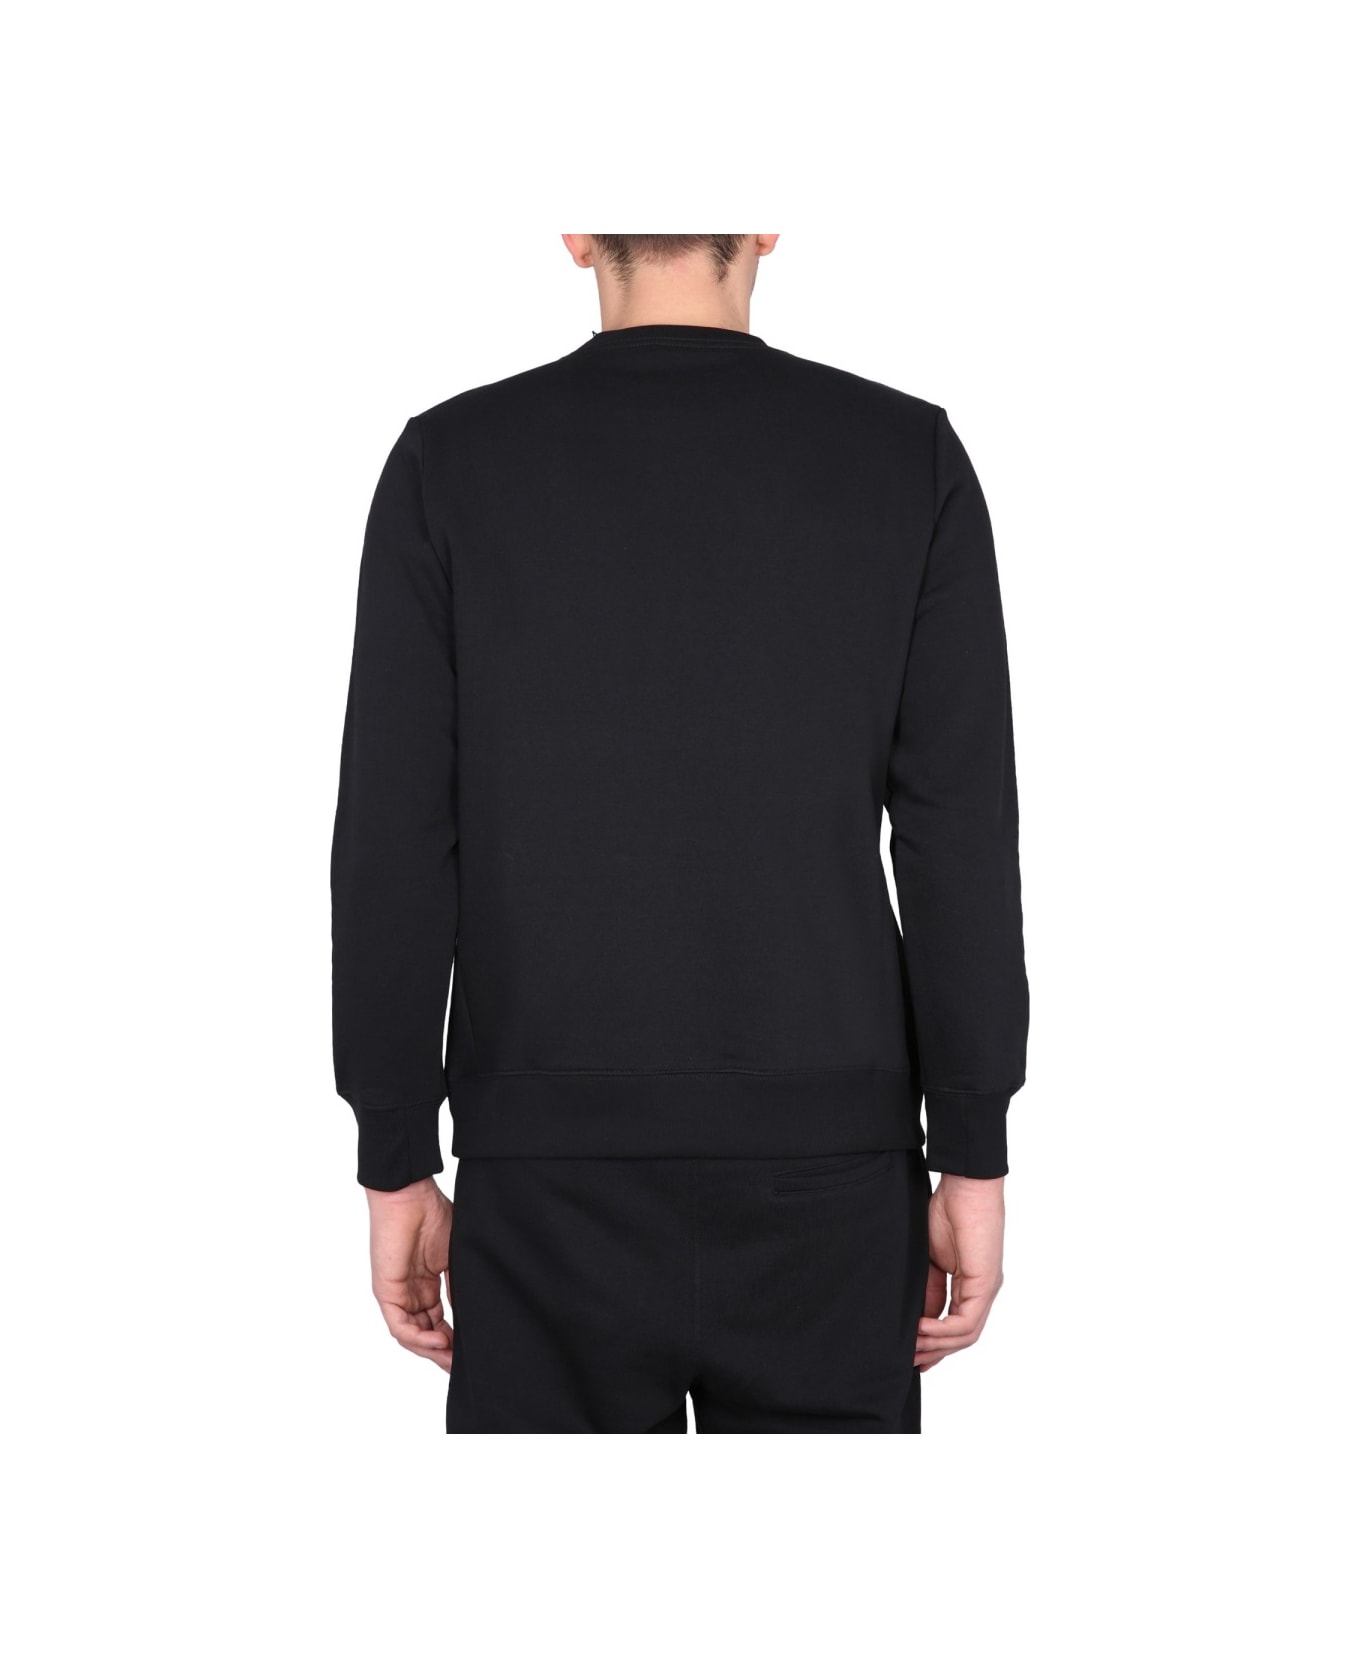 PS by Paul Smith Sweatshirt With Zebra Embroidery - BLACK フリース